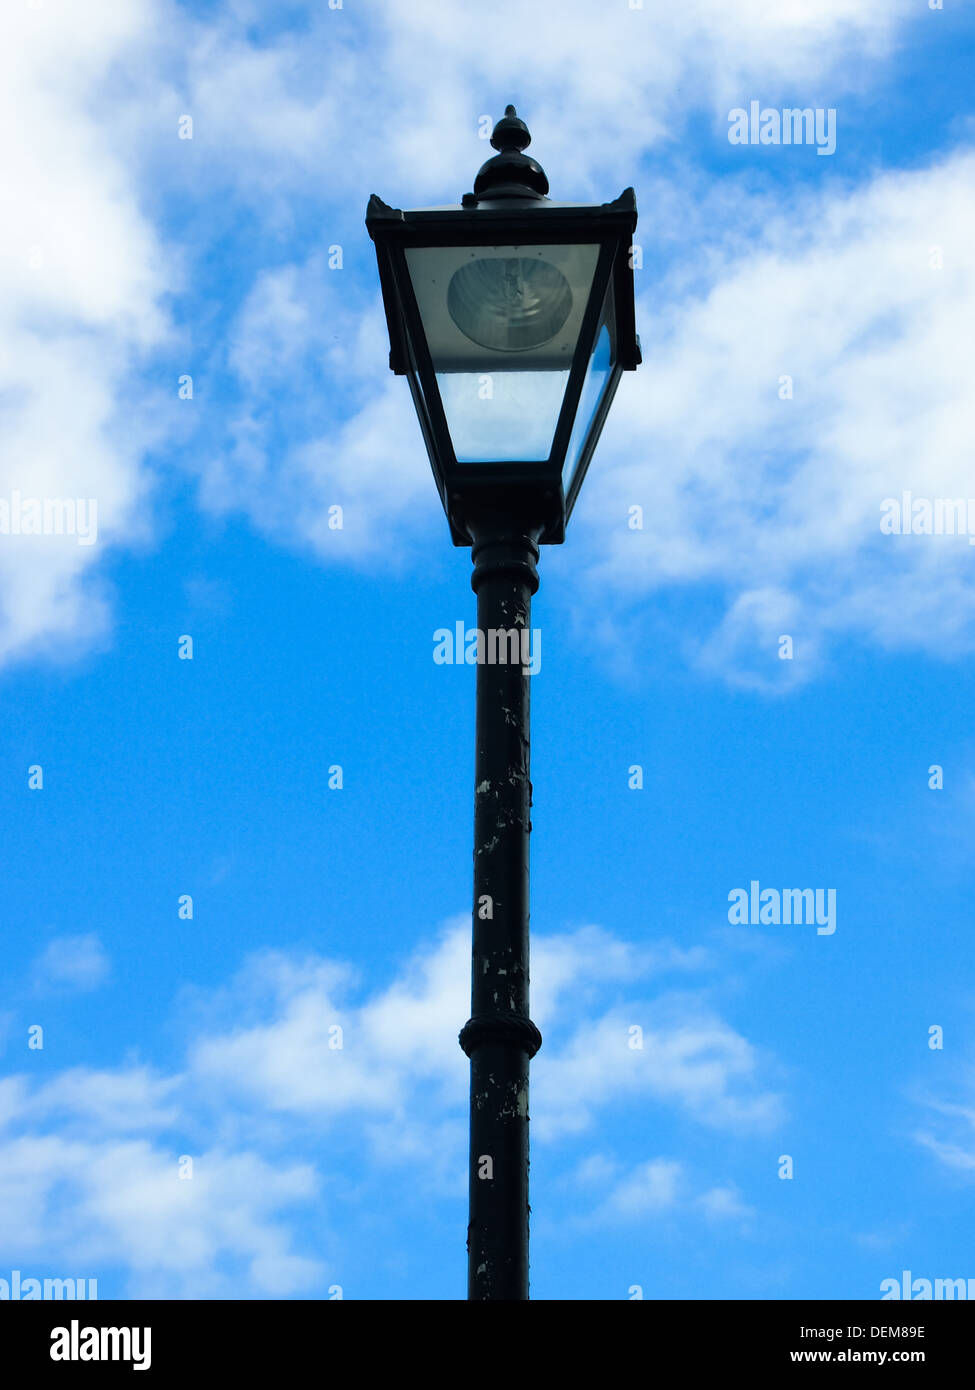 A retro style electric street lamp in the shape of a gas lamp. Stock Photo